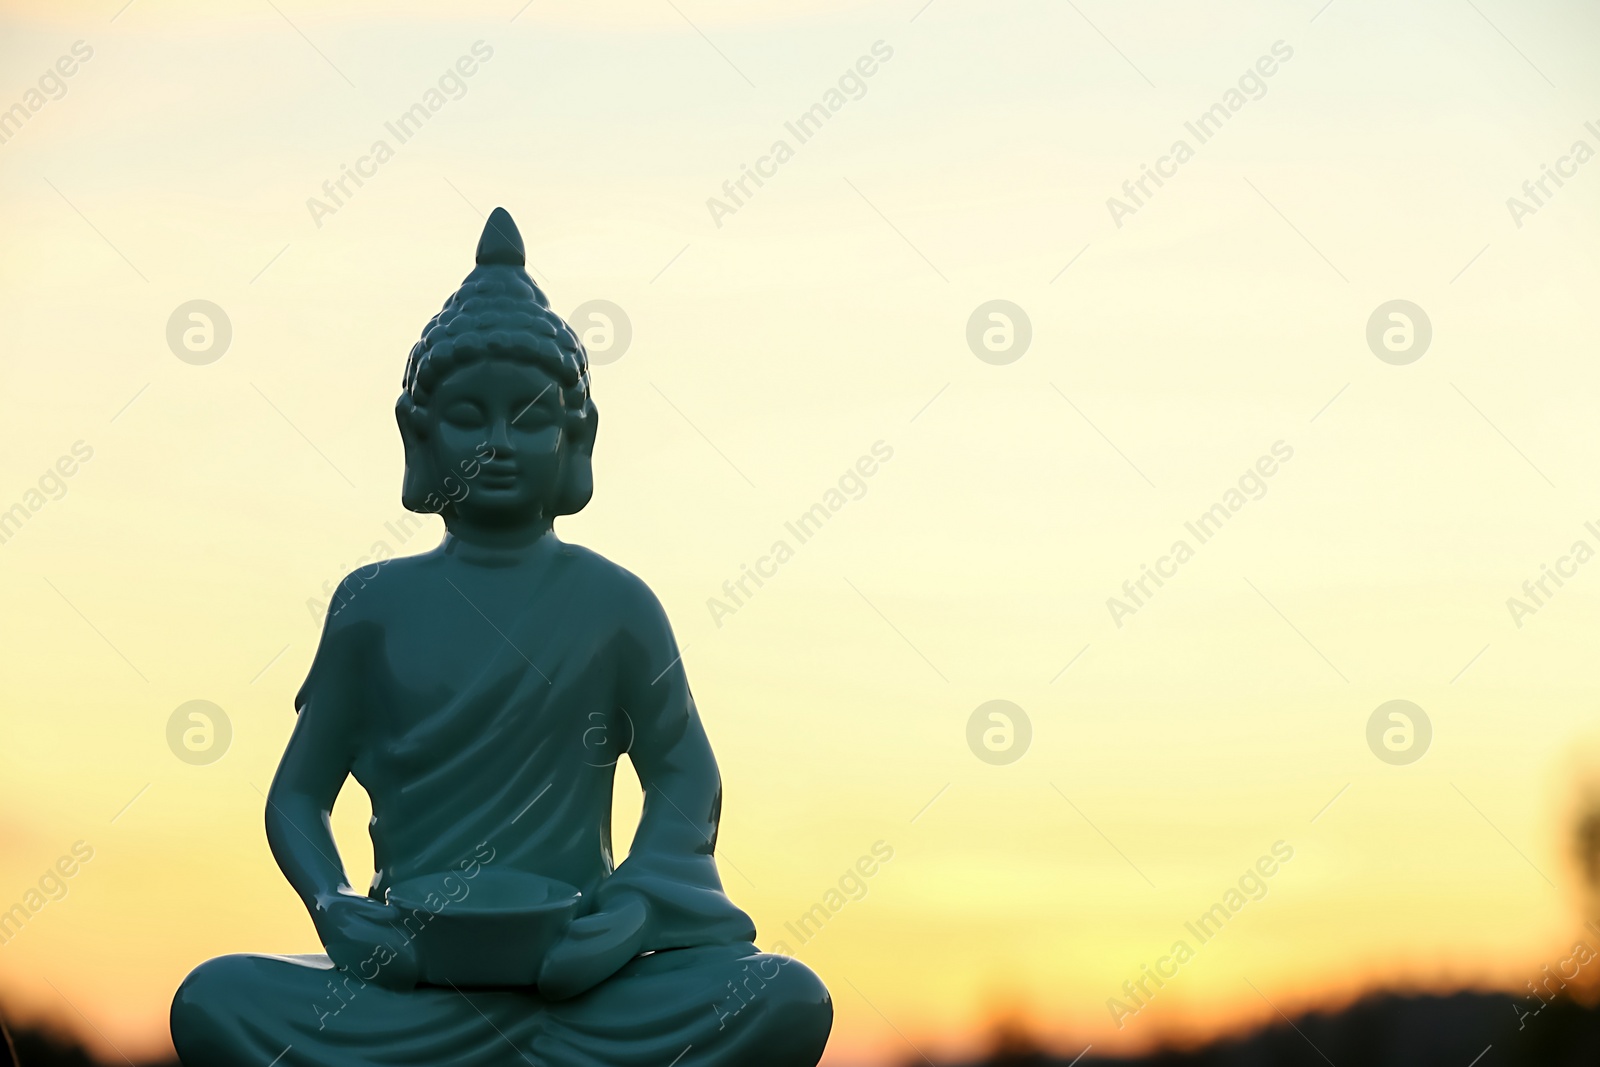 Photo of Decorative Buddha statue outdoors at sunset. Space for text